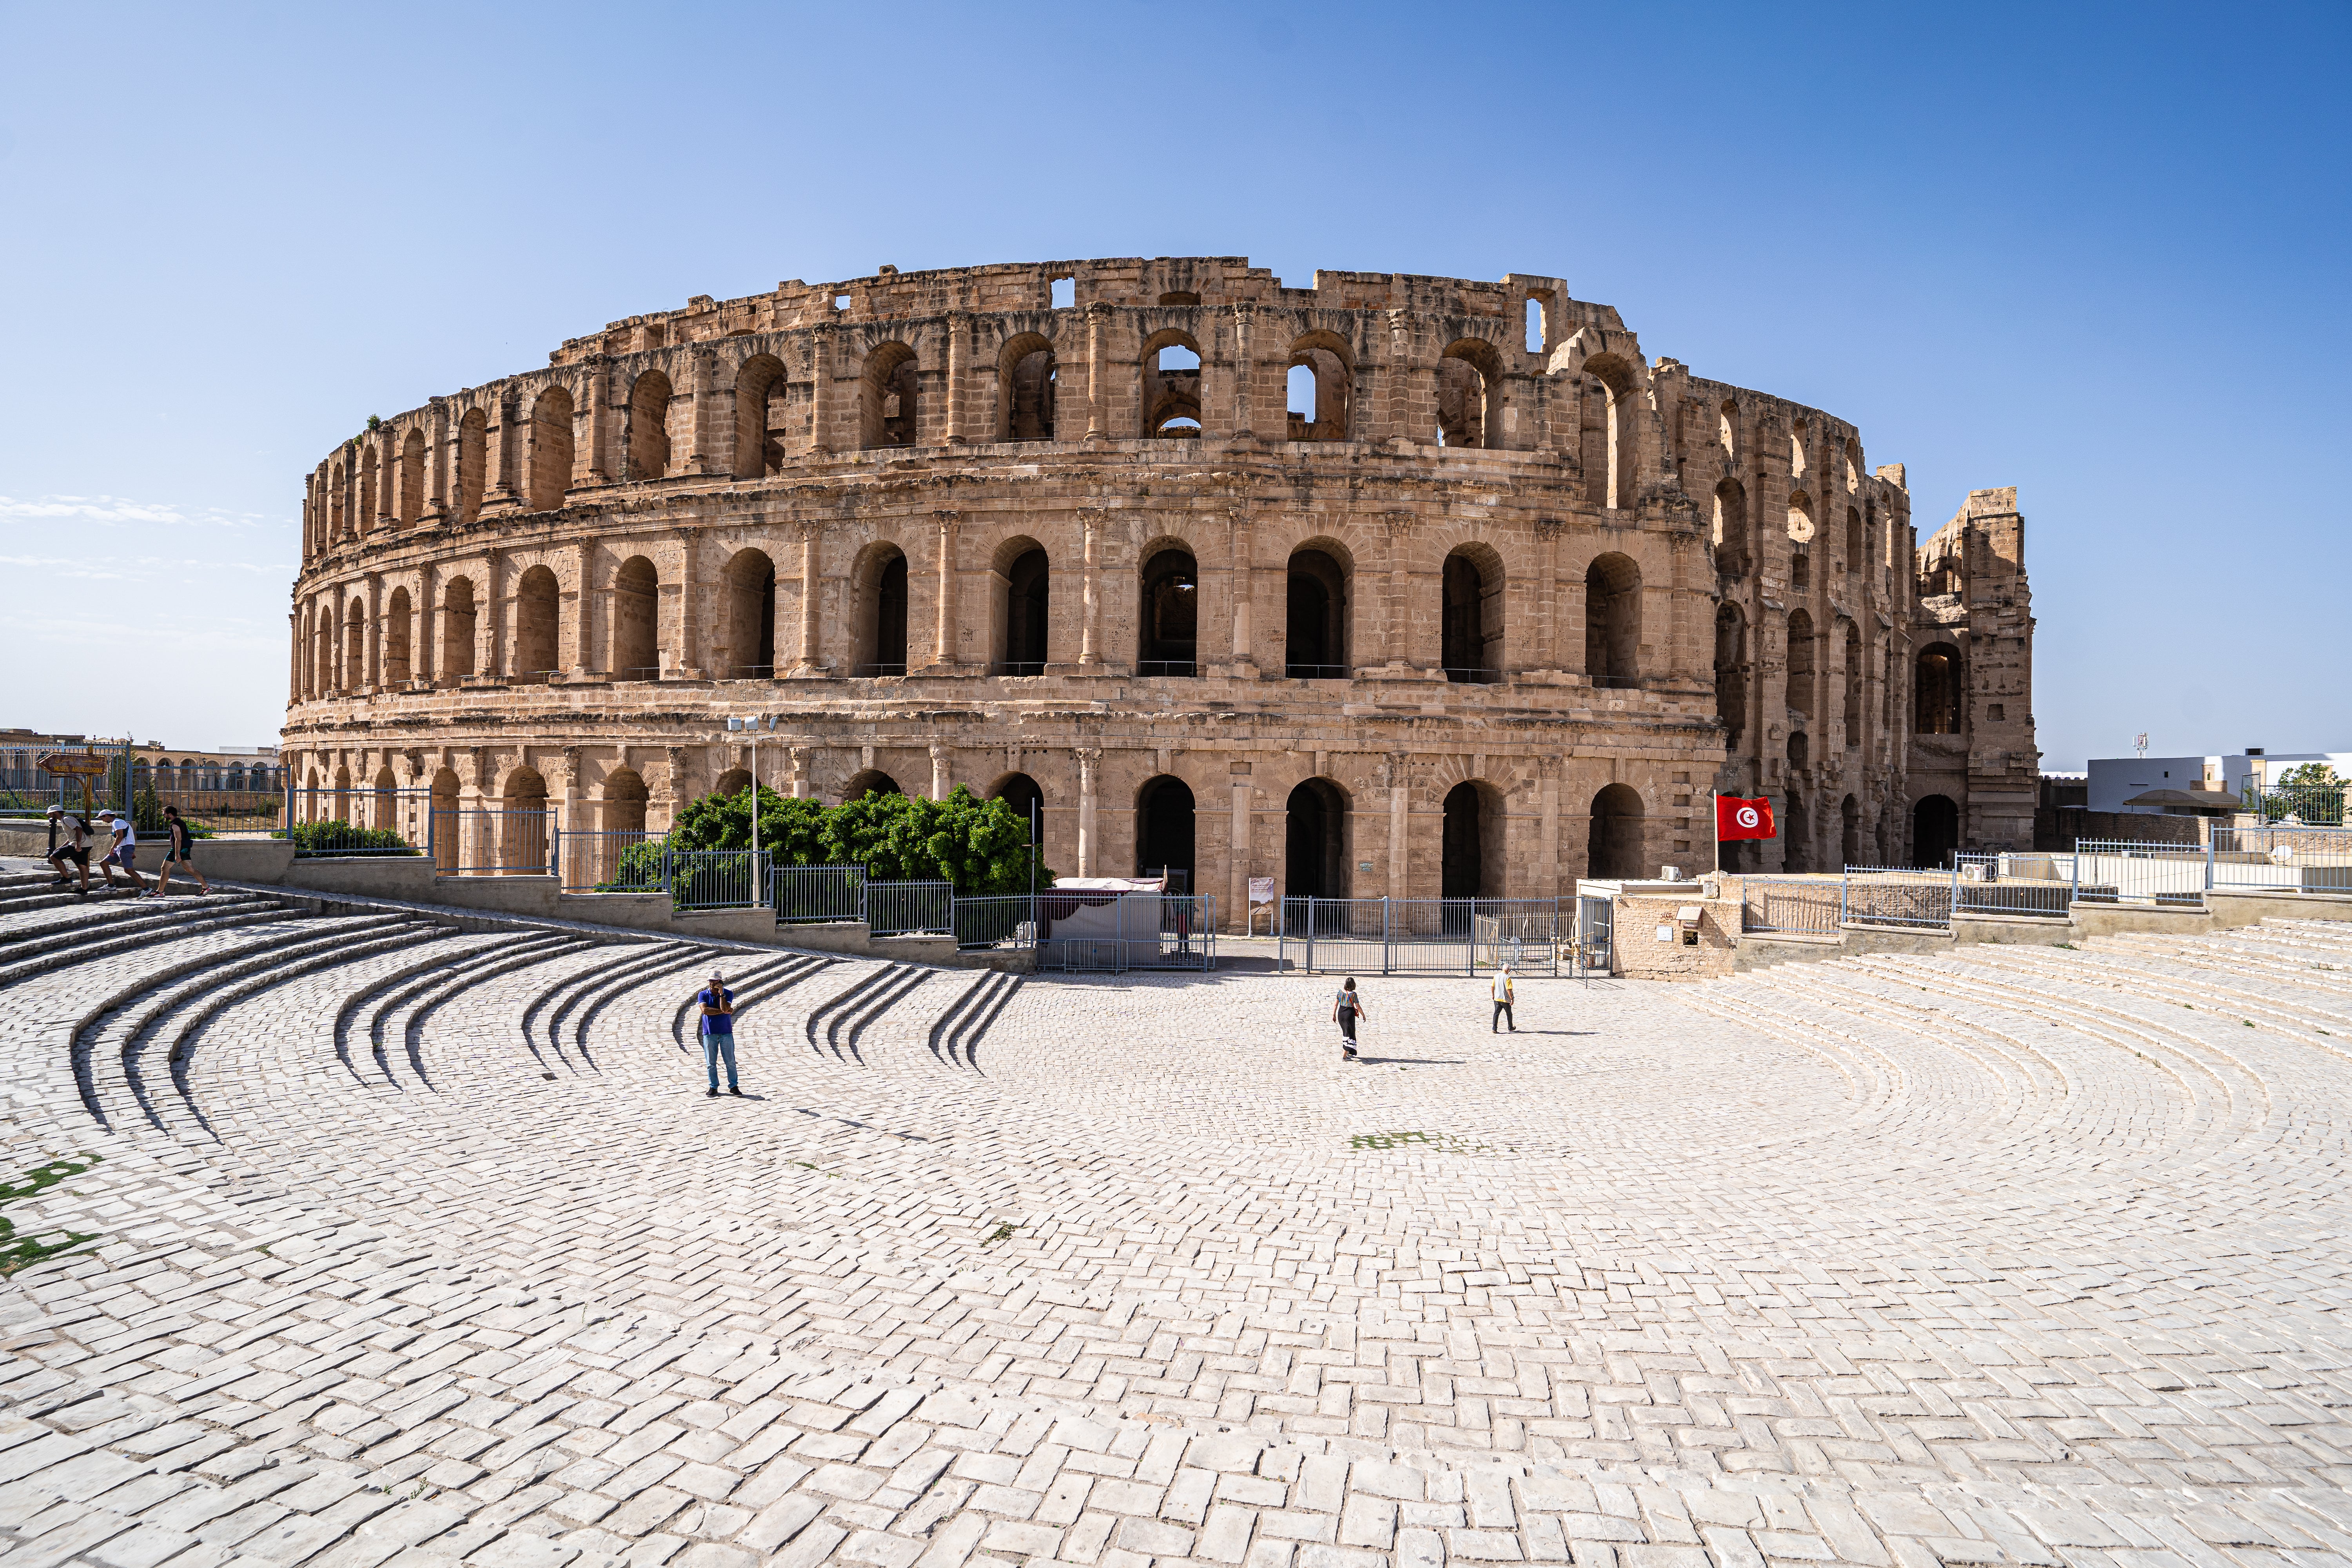 El Jem is the third-largest Roman amphitheatre in the world